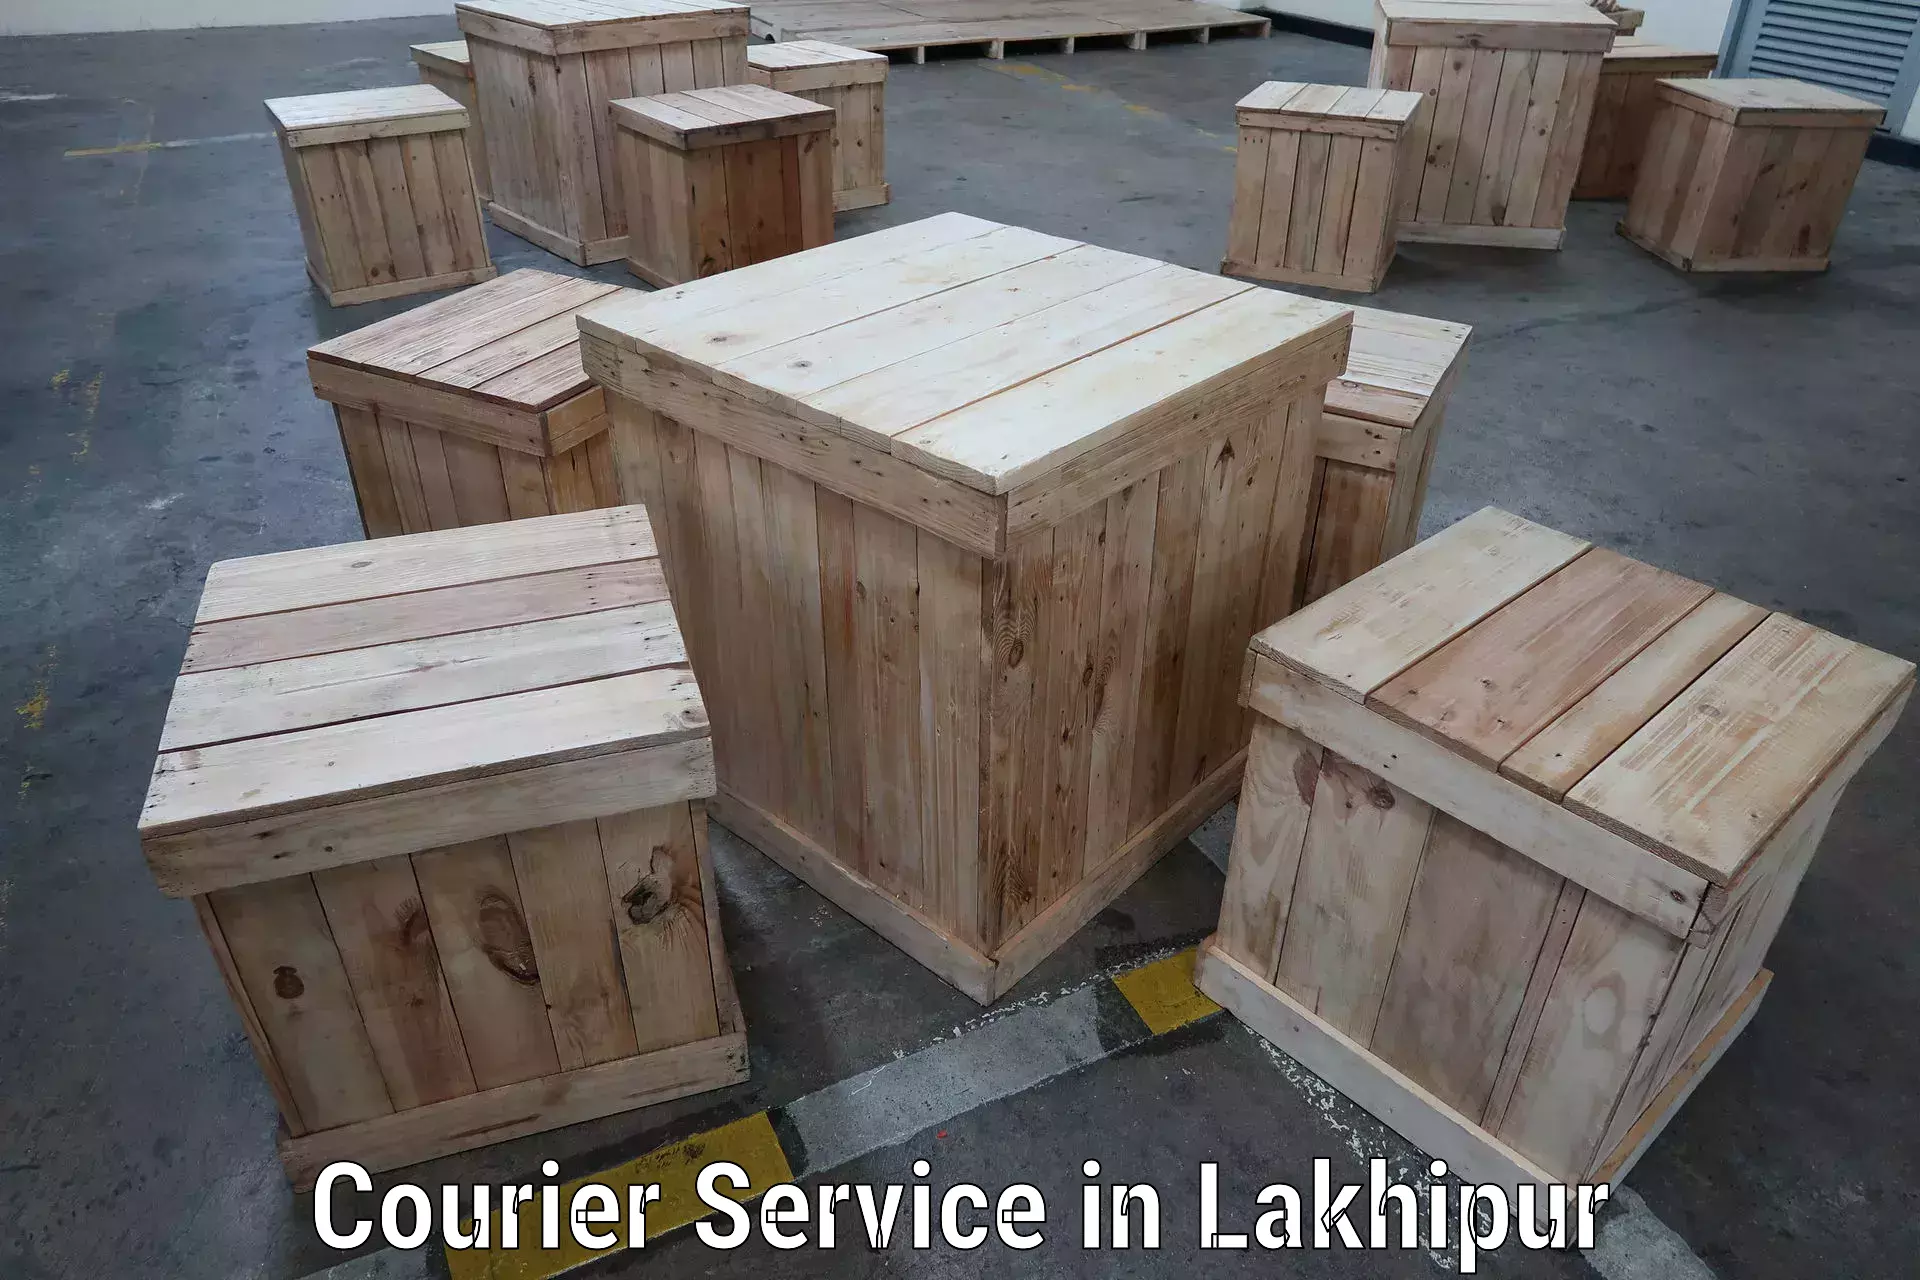 Express delivery solutions in Lakhipur